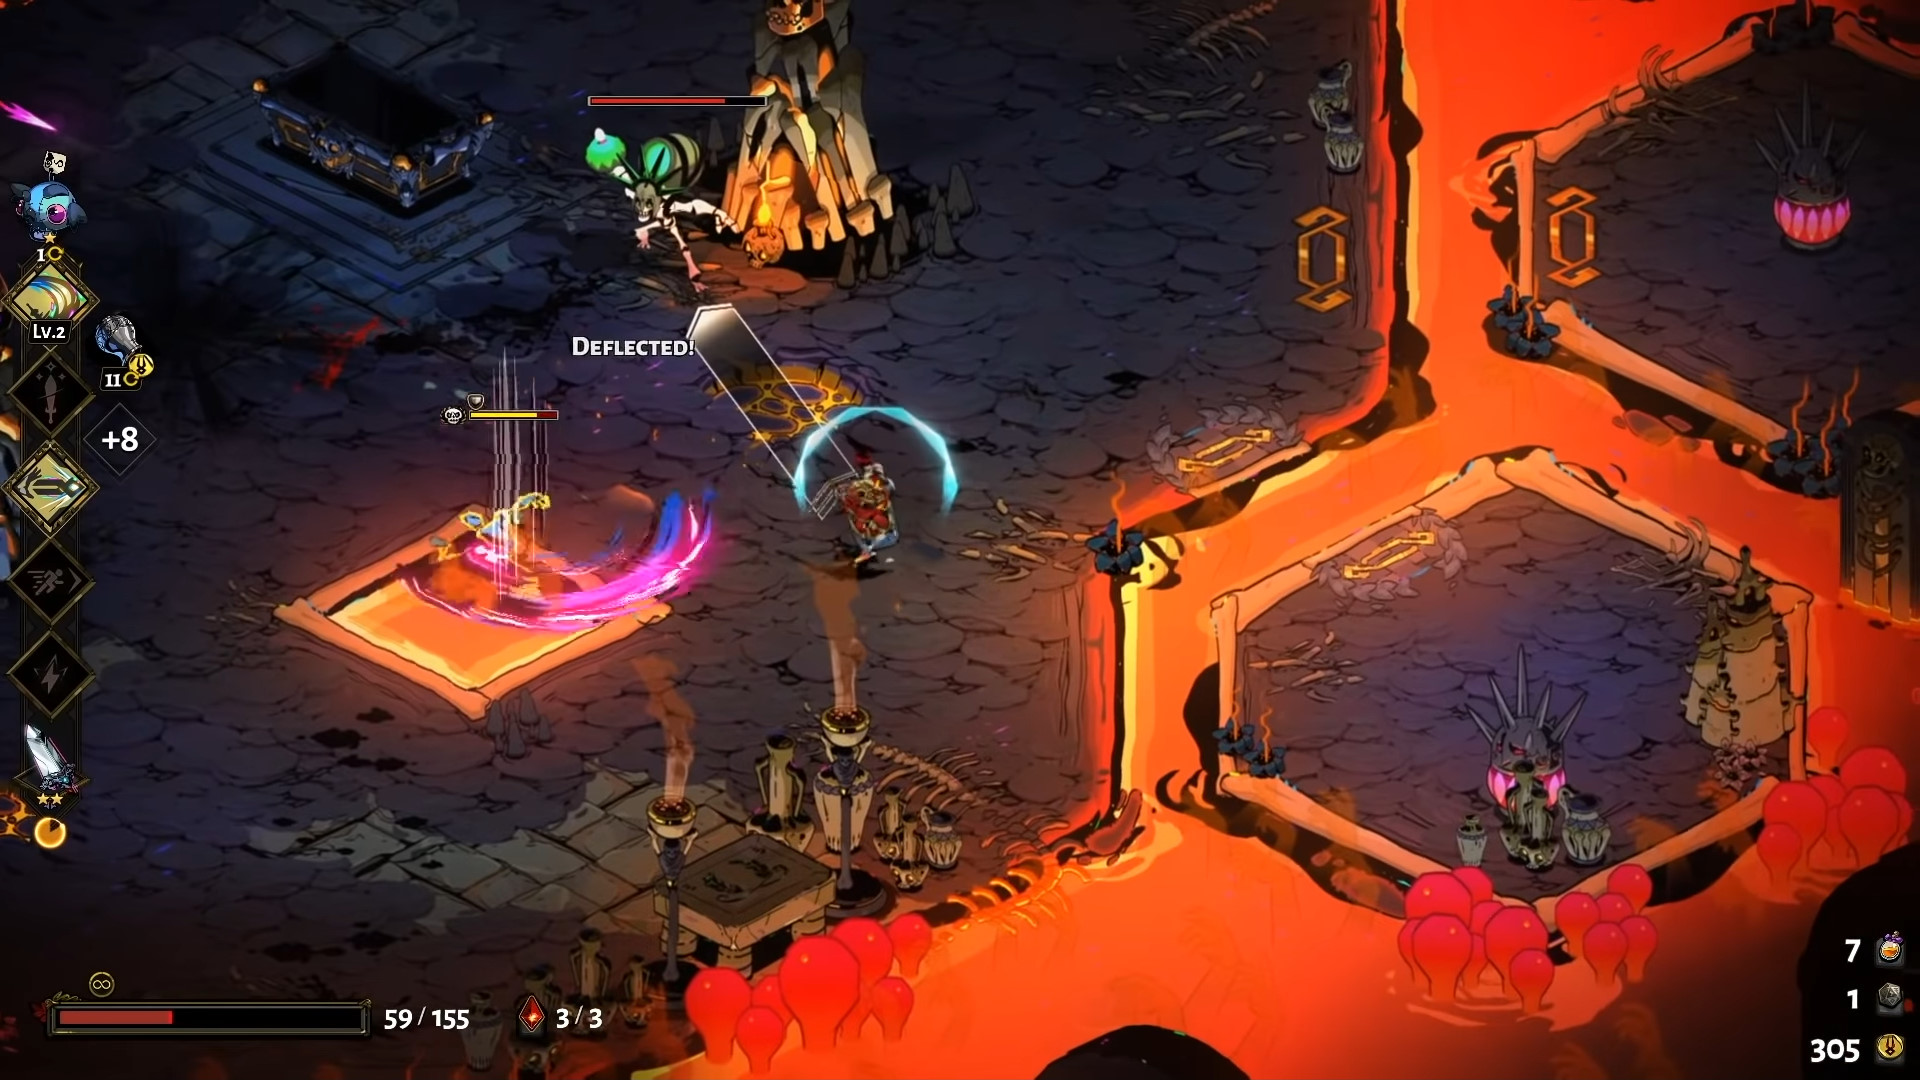 Supergiant Games is bringing Hades to Steam Early Access on